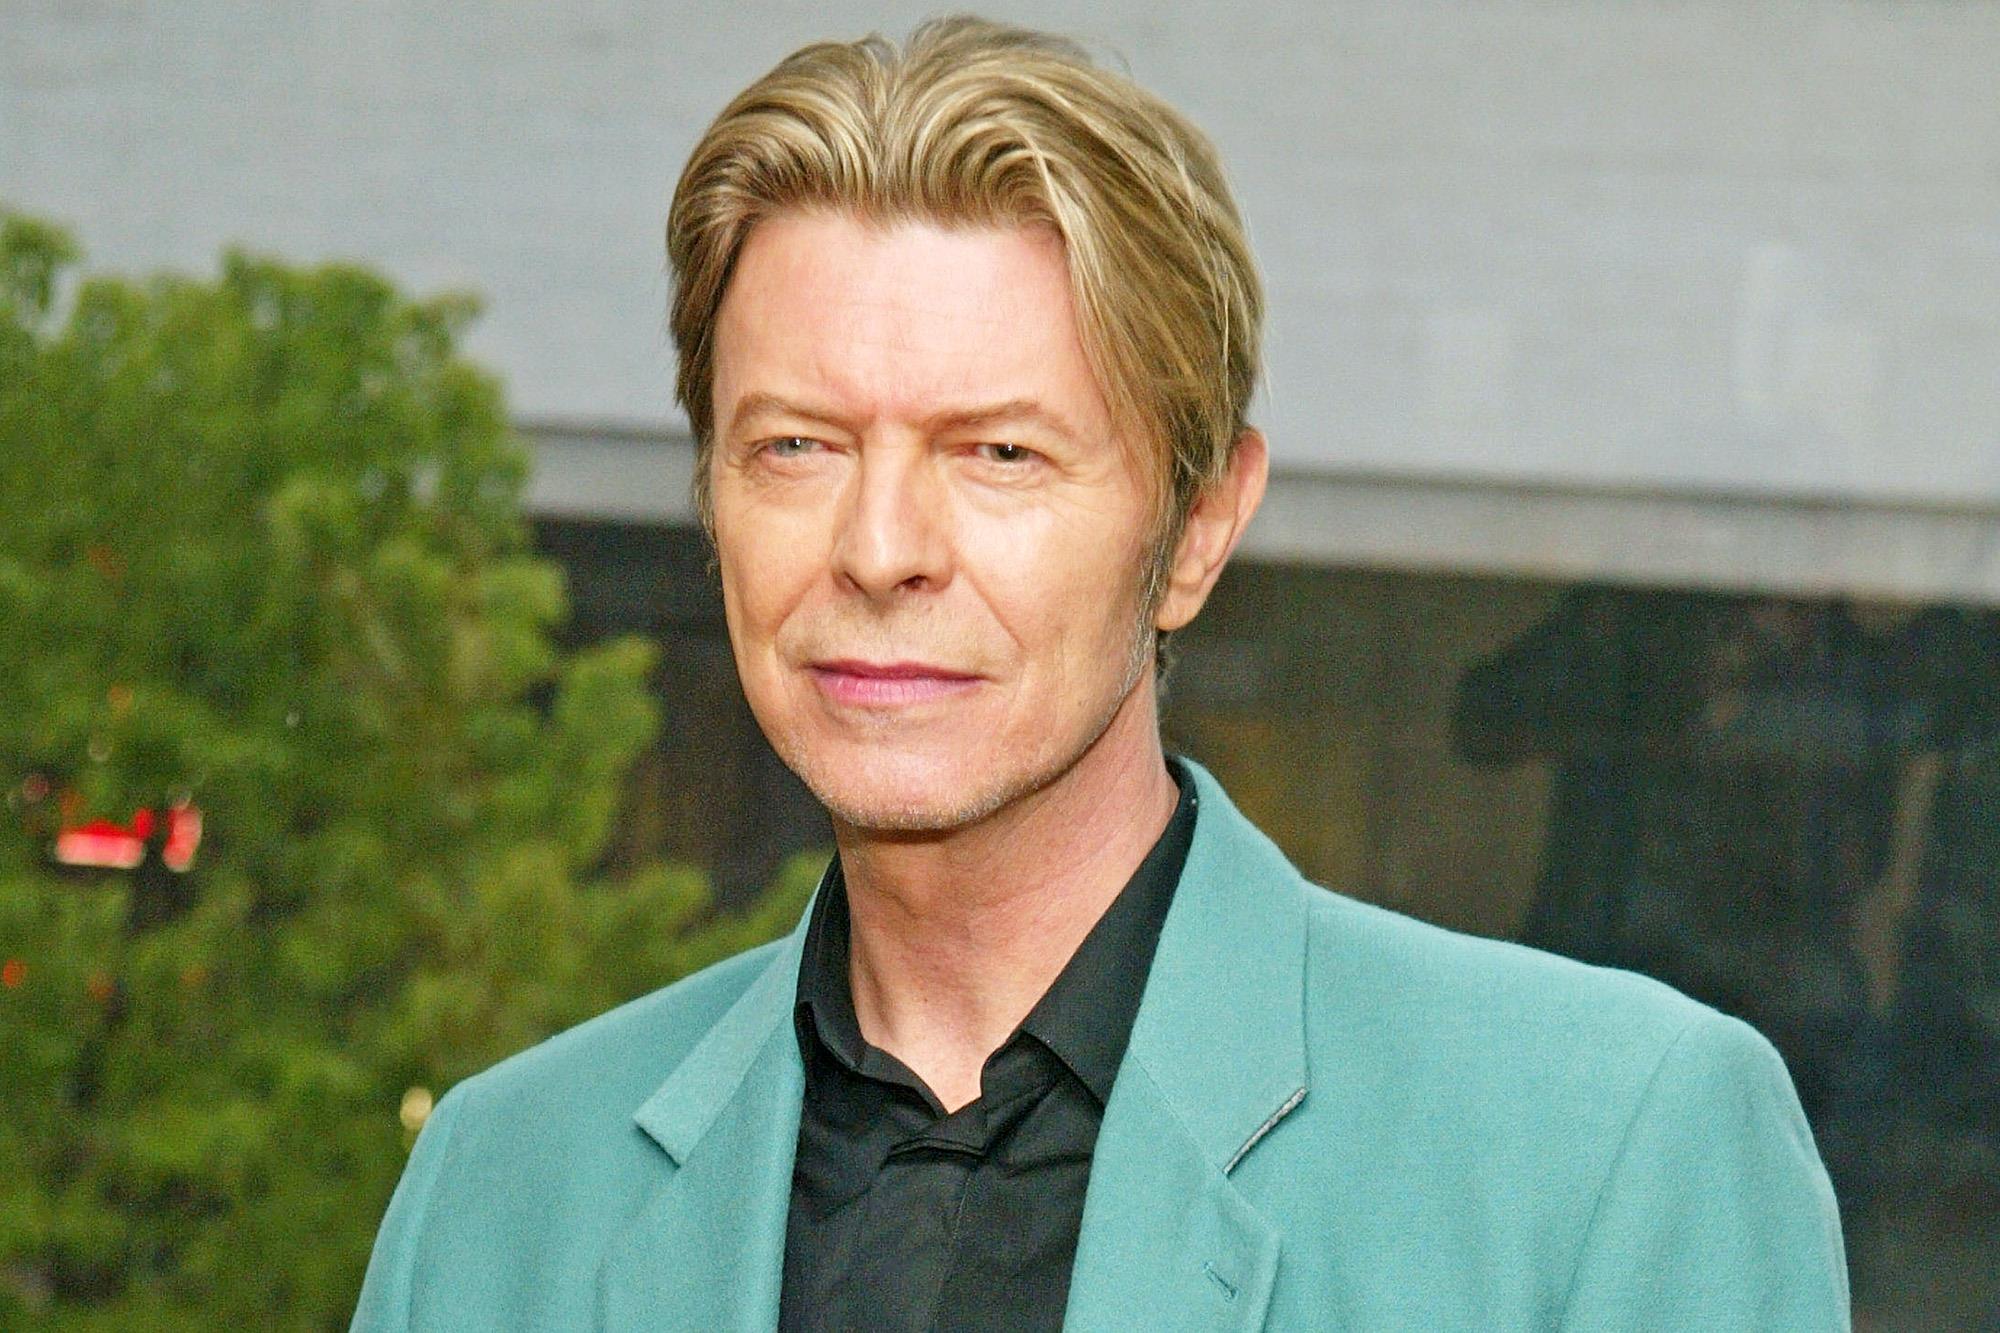 18 Facts About David Bowie - Facts.net